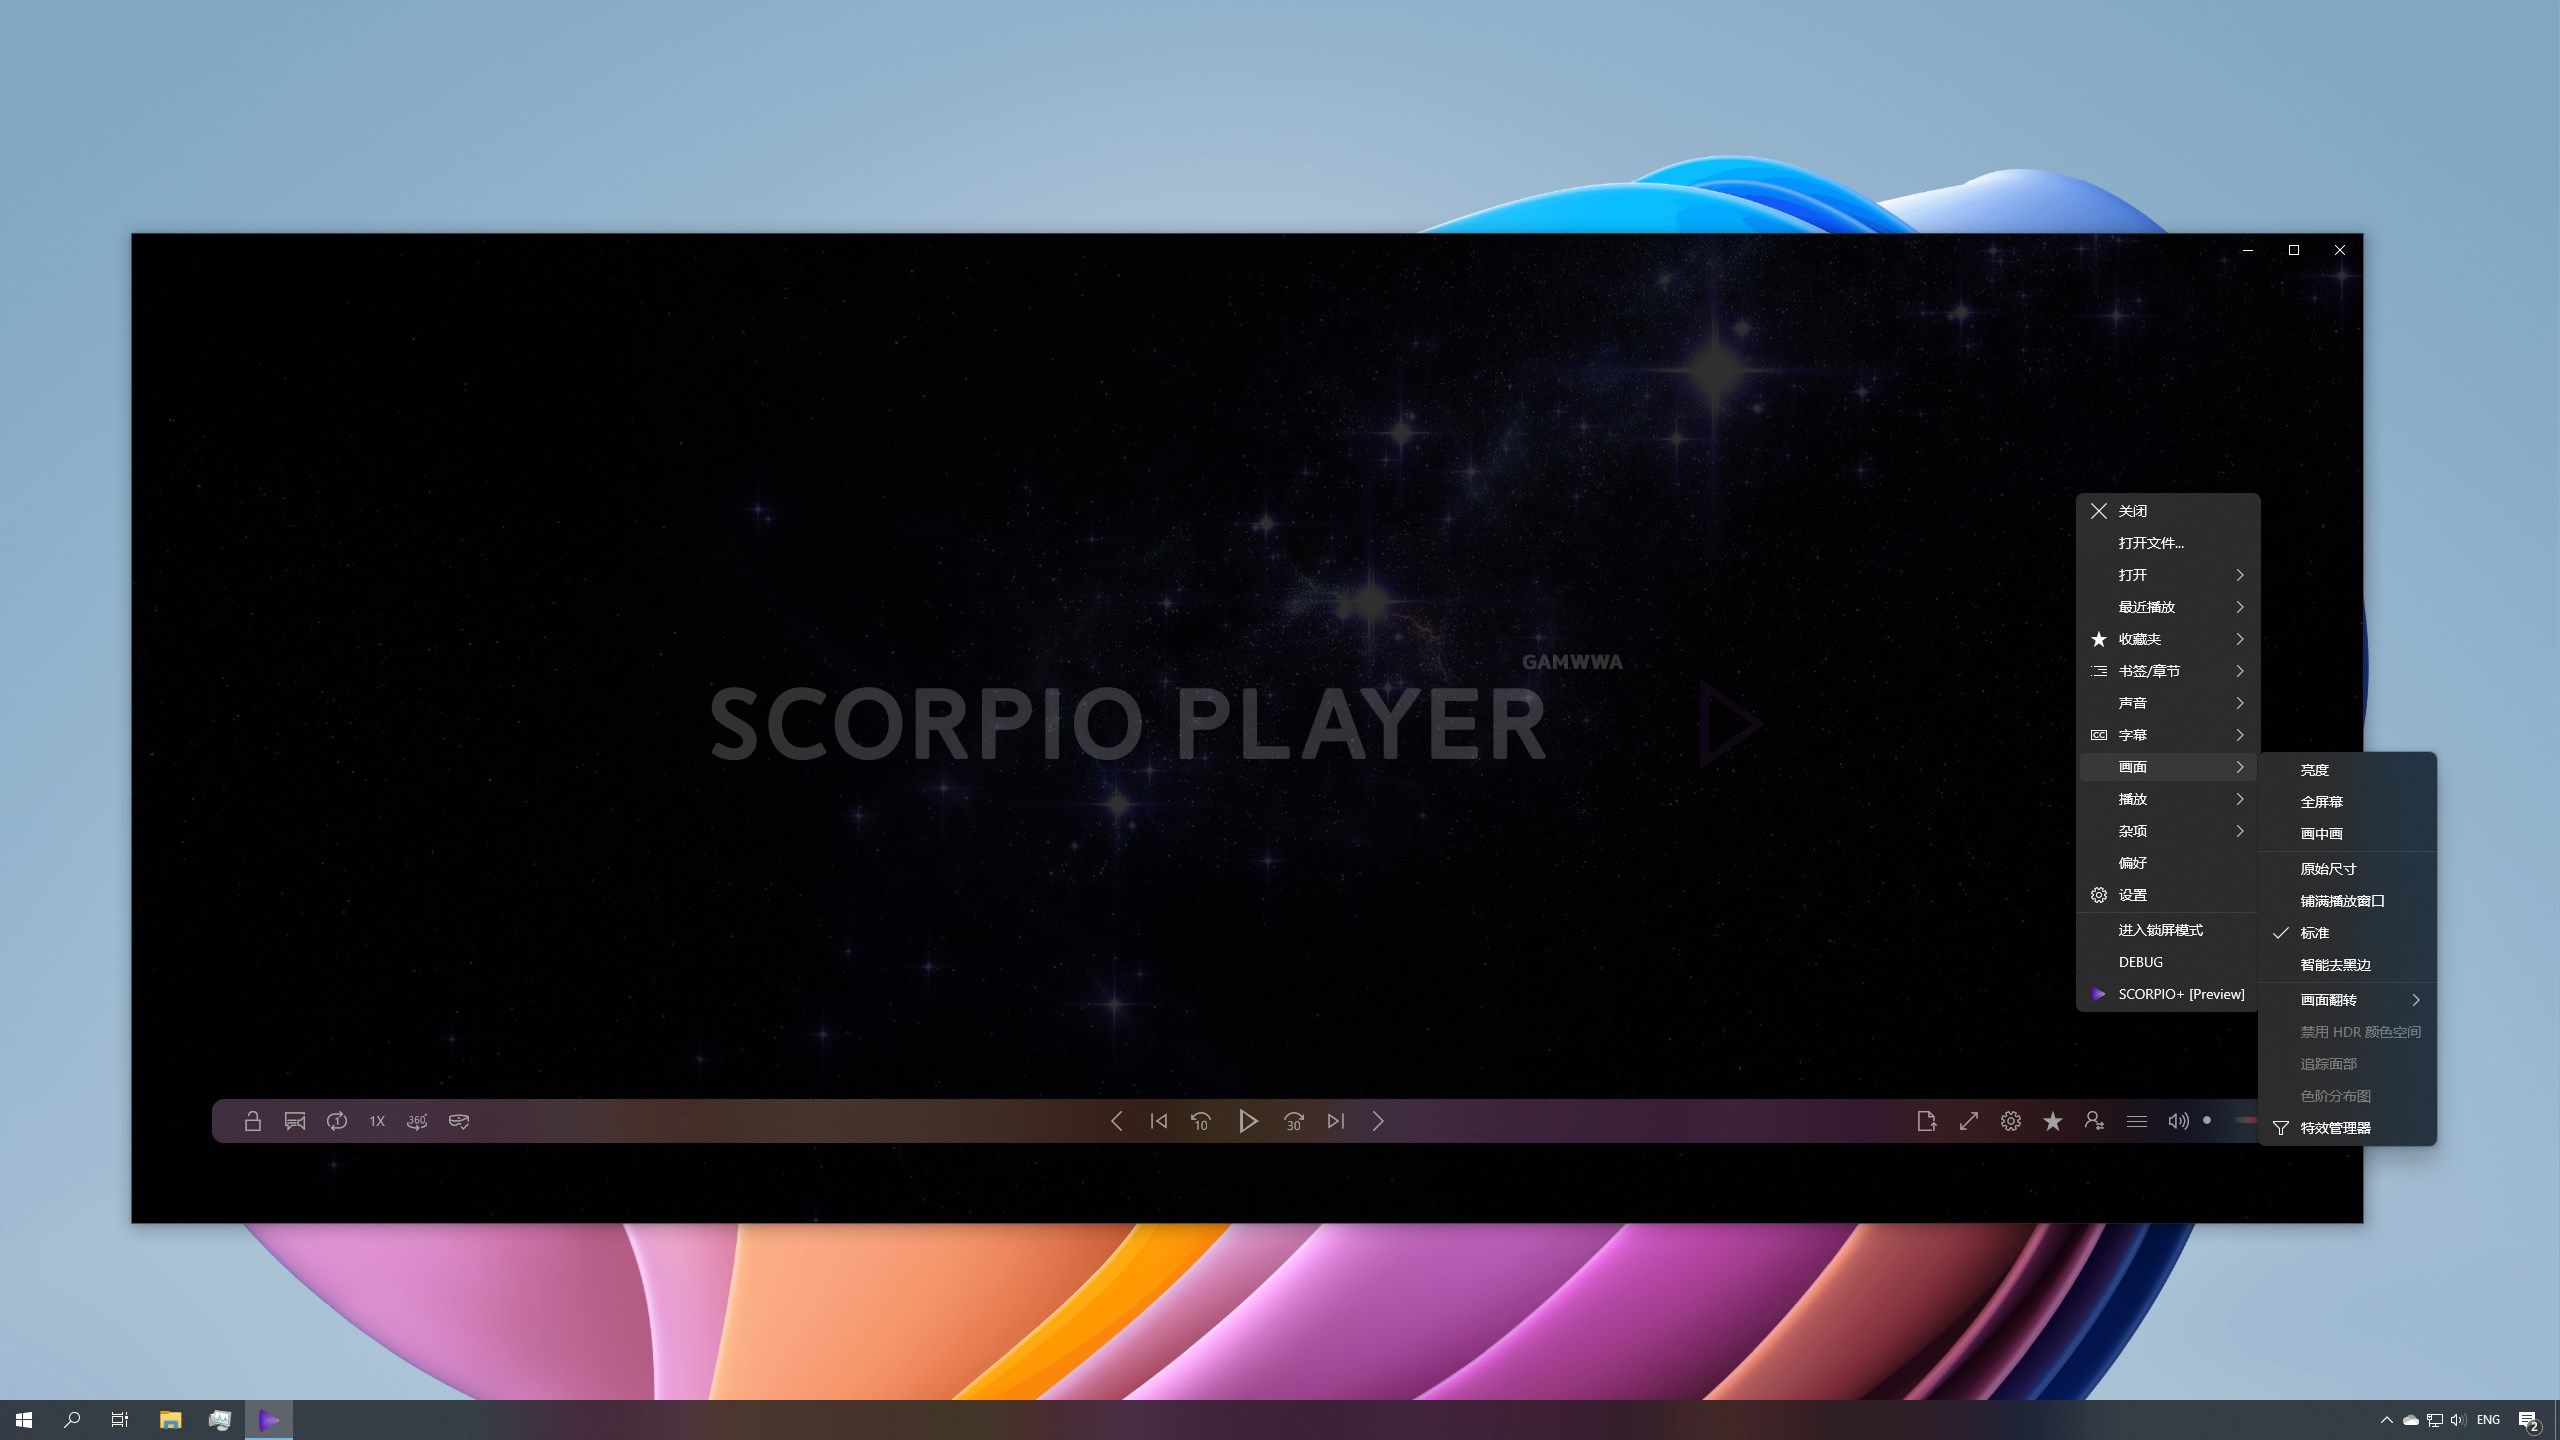 SCORPIO PLAYER X - The Ultimate Video Player